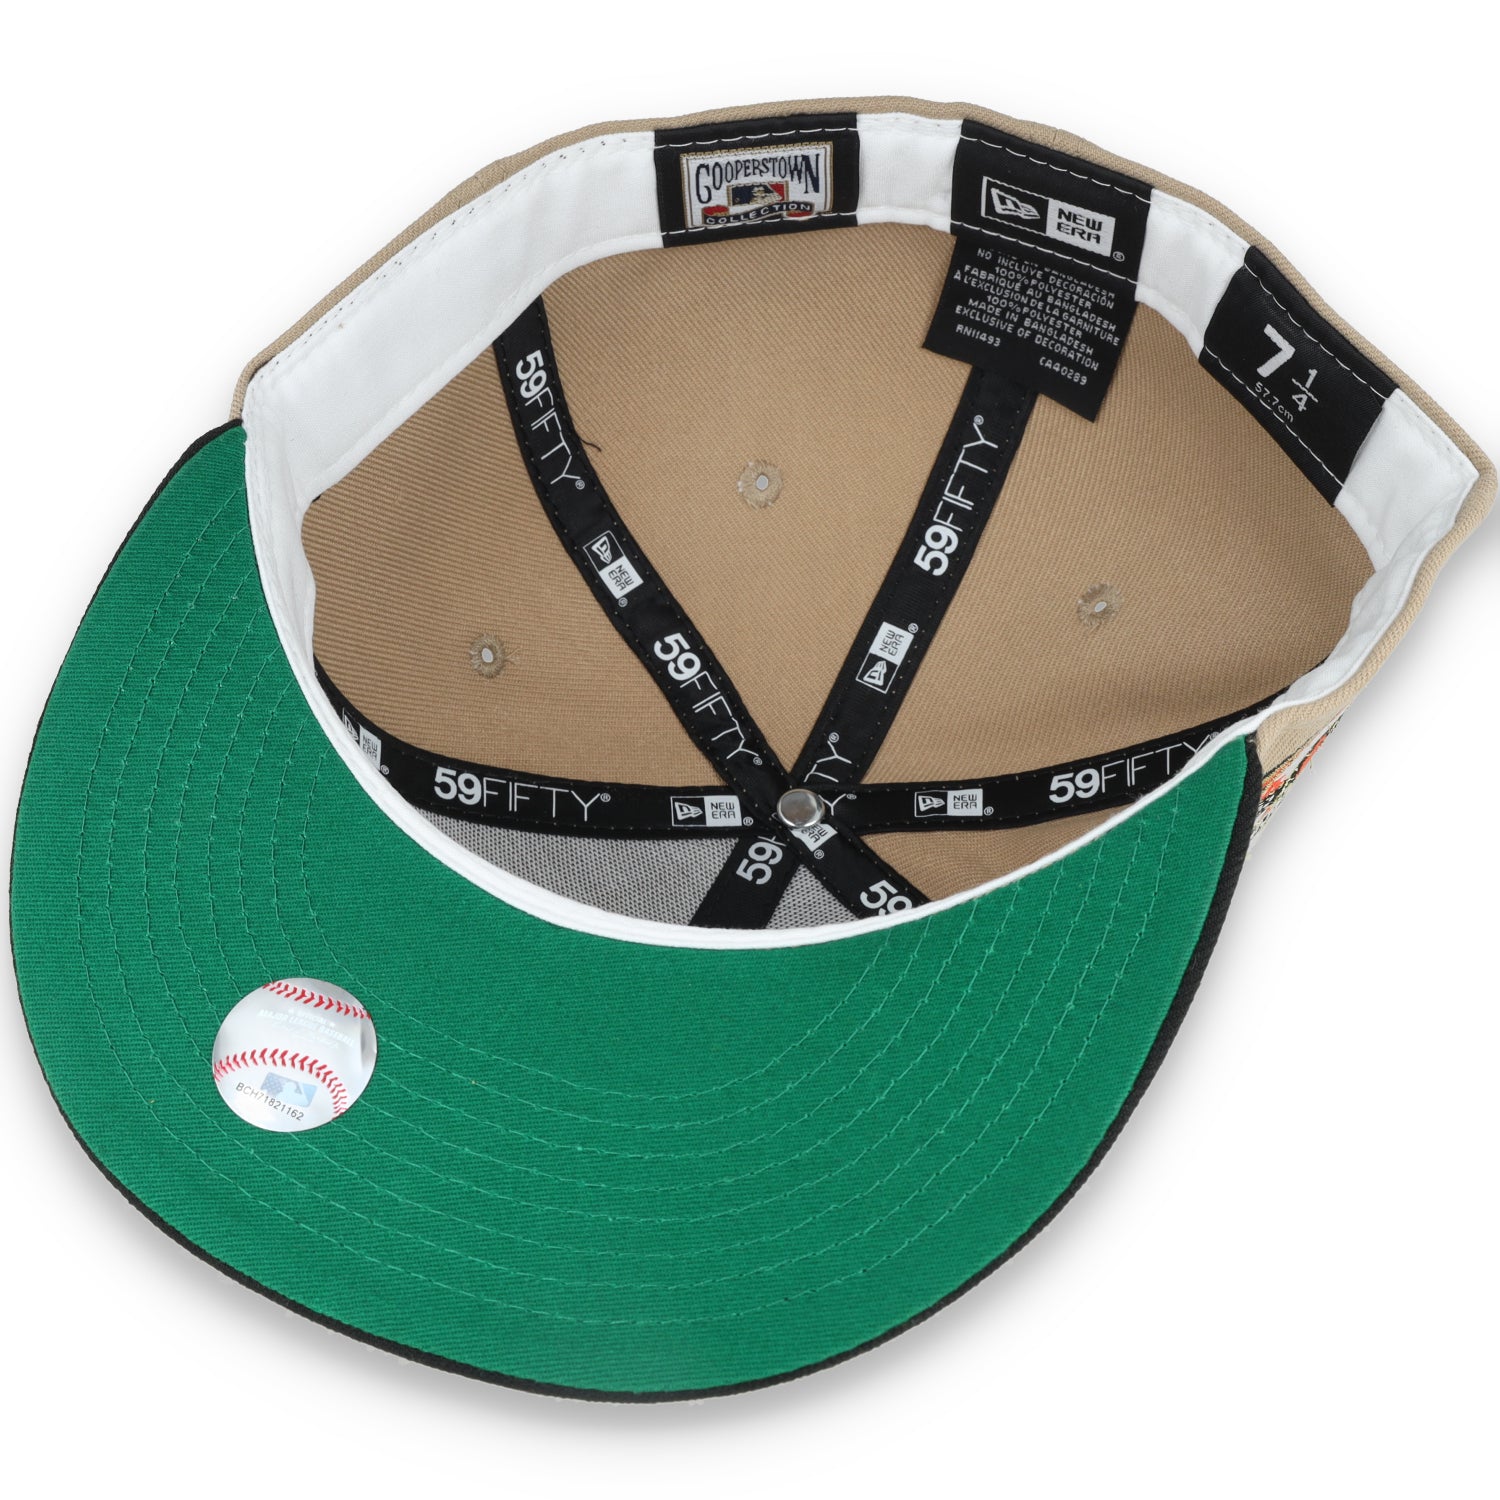 New Era San Francisco Giants 2000 Inaugural Season Side Patch 59FIFTY Fitted Khaki Hat